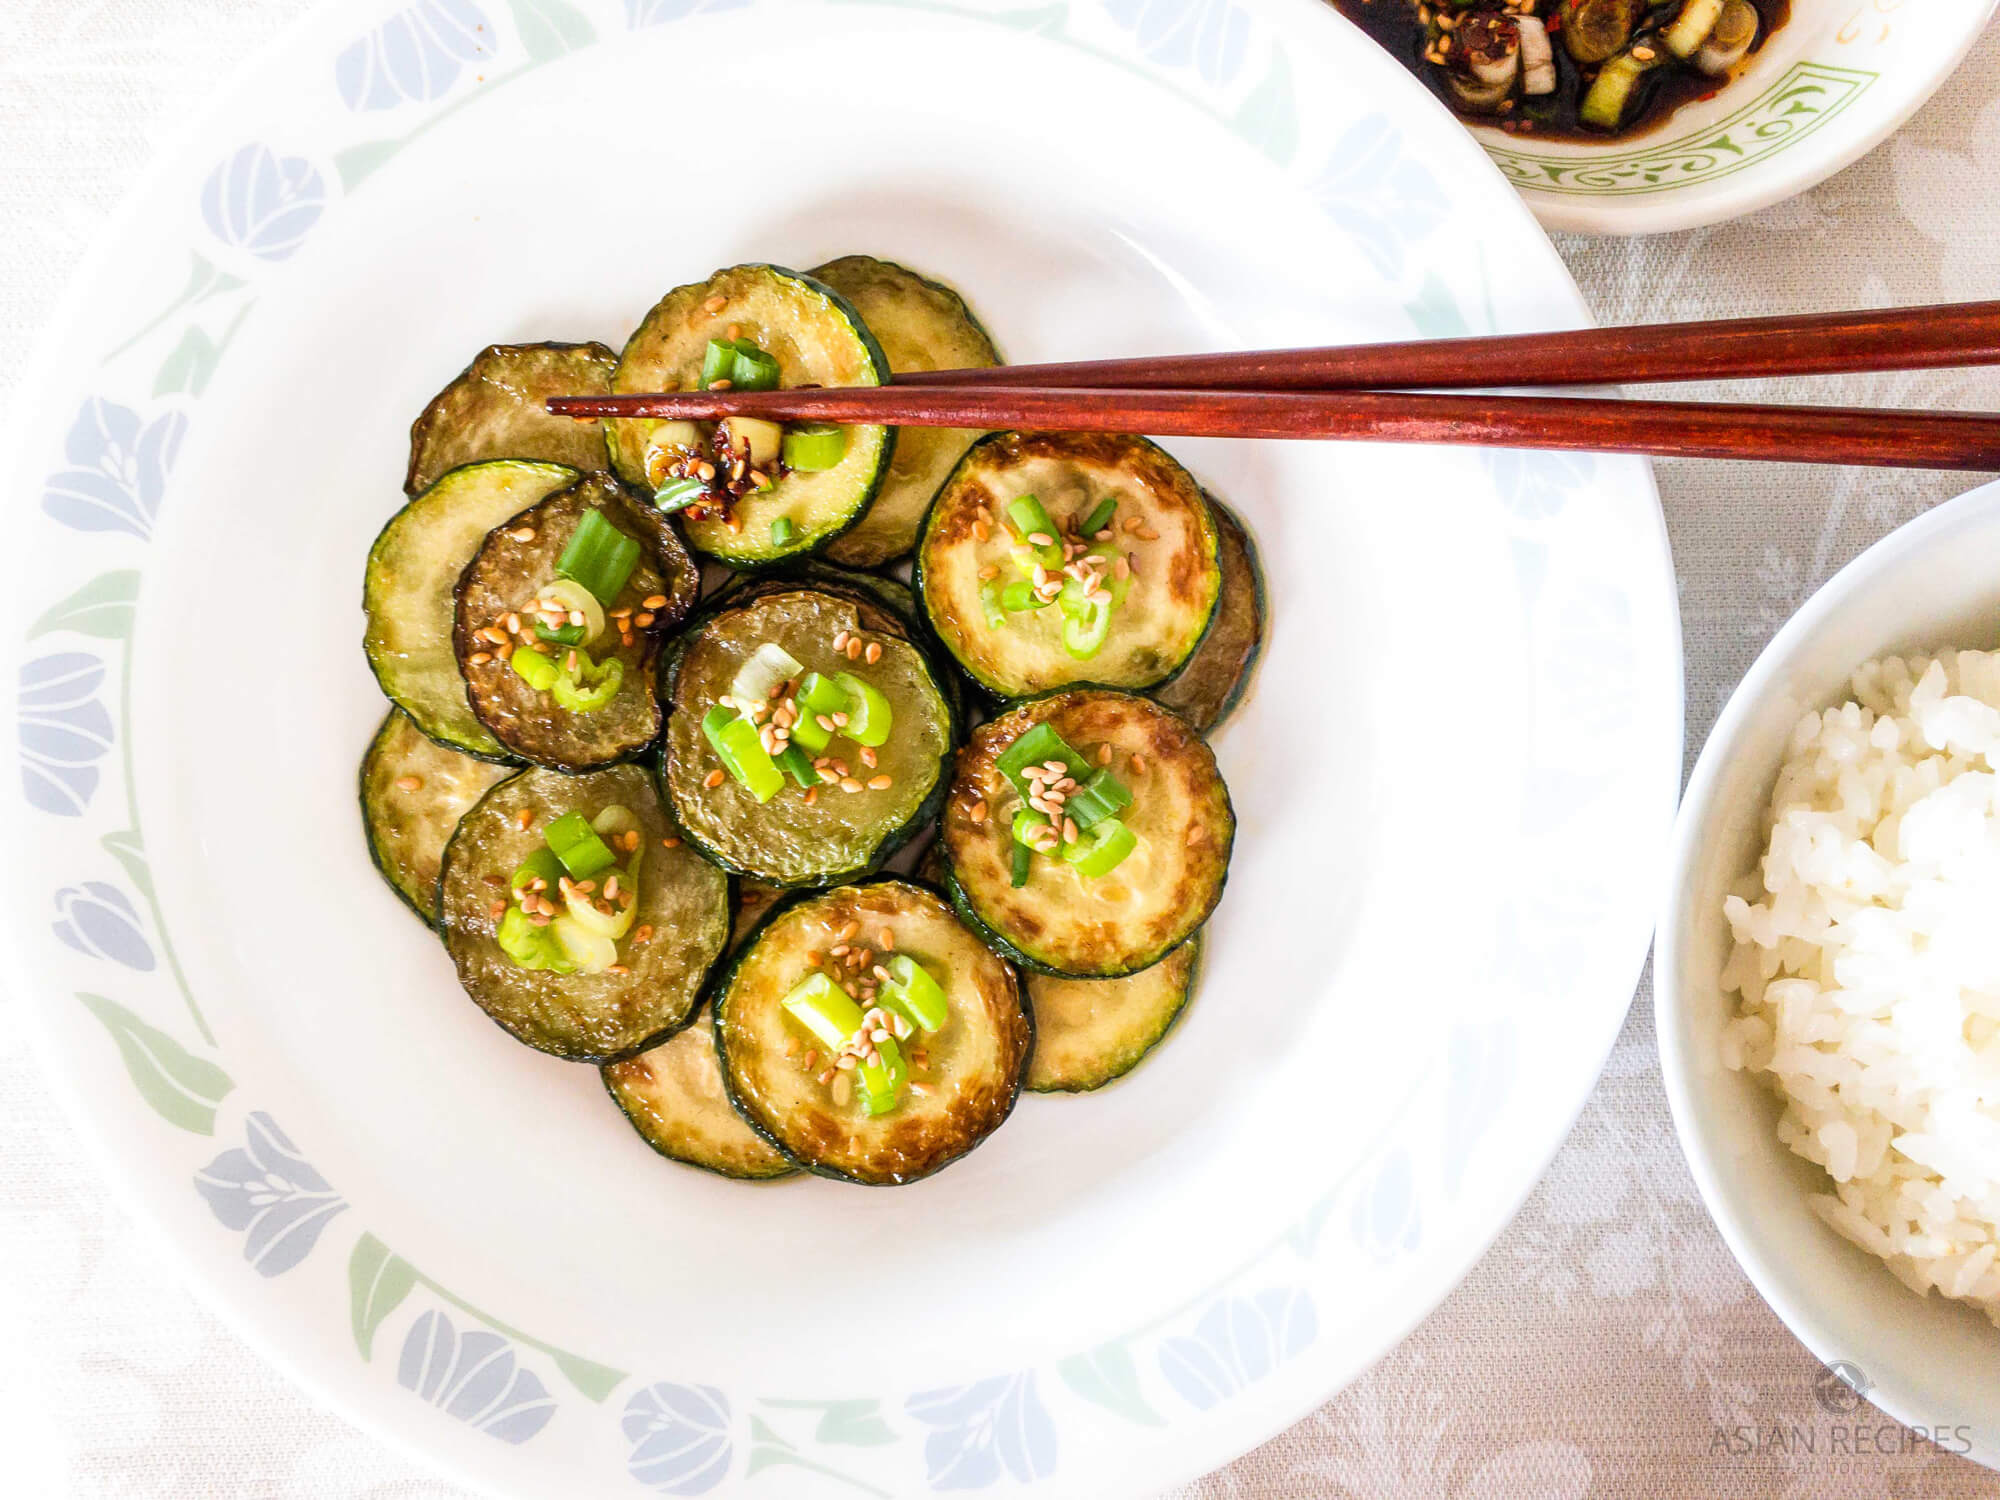 Fresh zucchini is pan-fried with delicious Asian flavors and ingredients. This easy Asian pan-fried zucchini is a healthy recipe that is a great side dish at any time of the year.